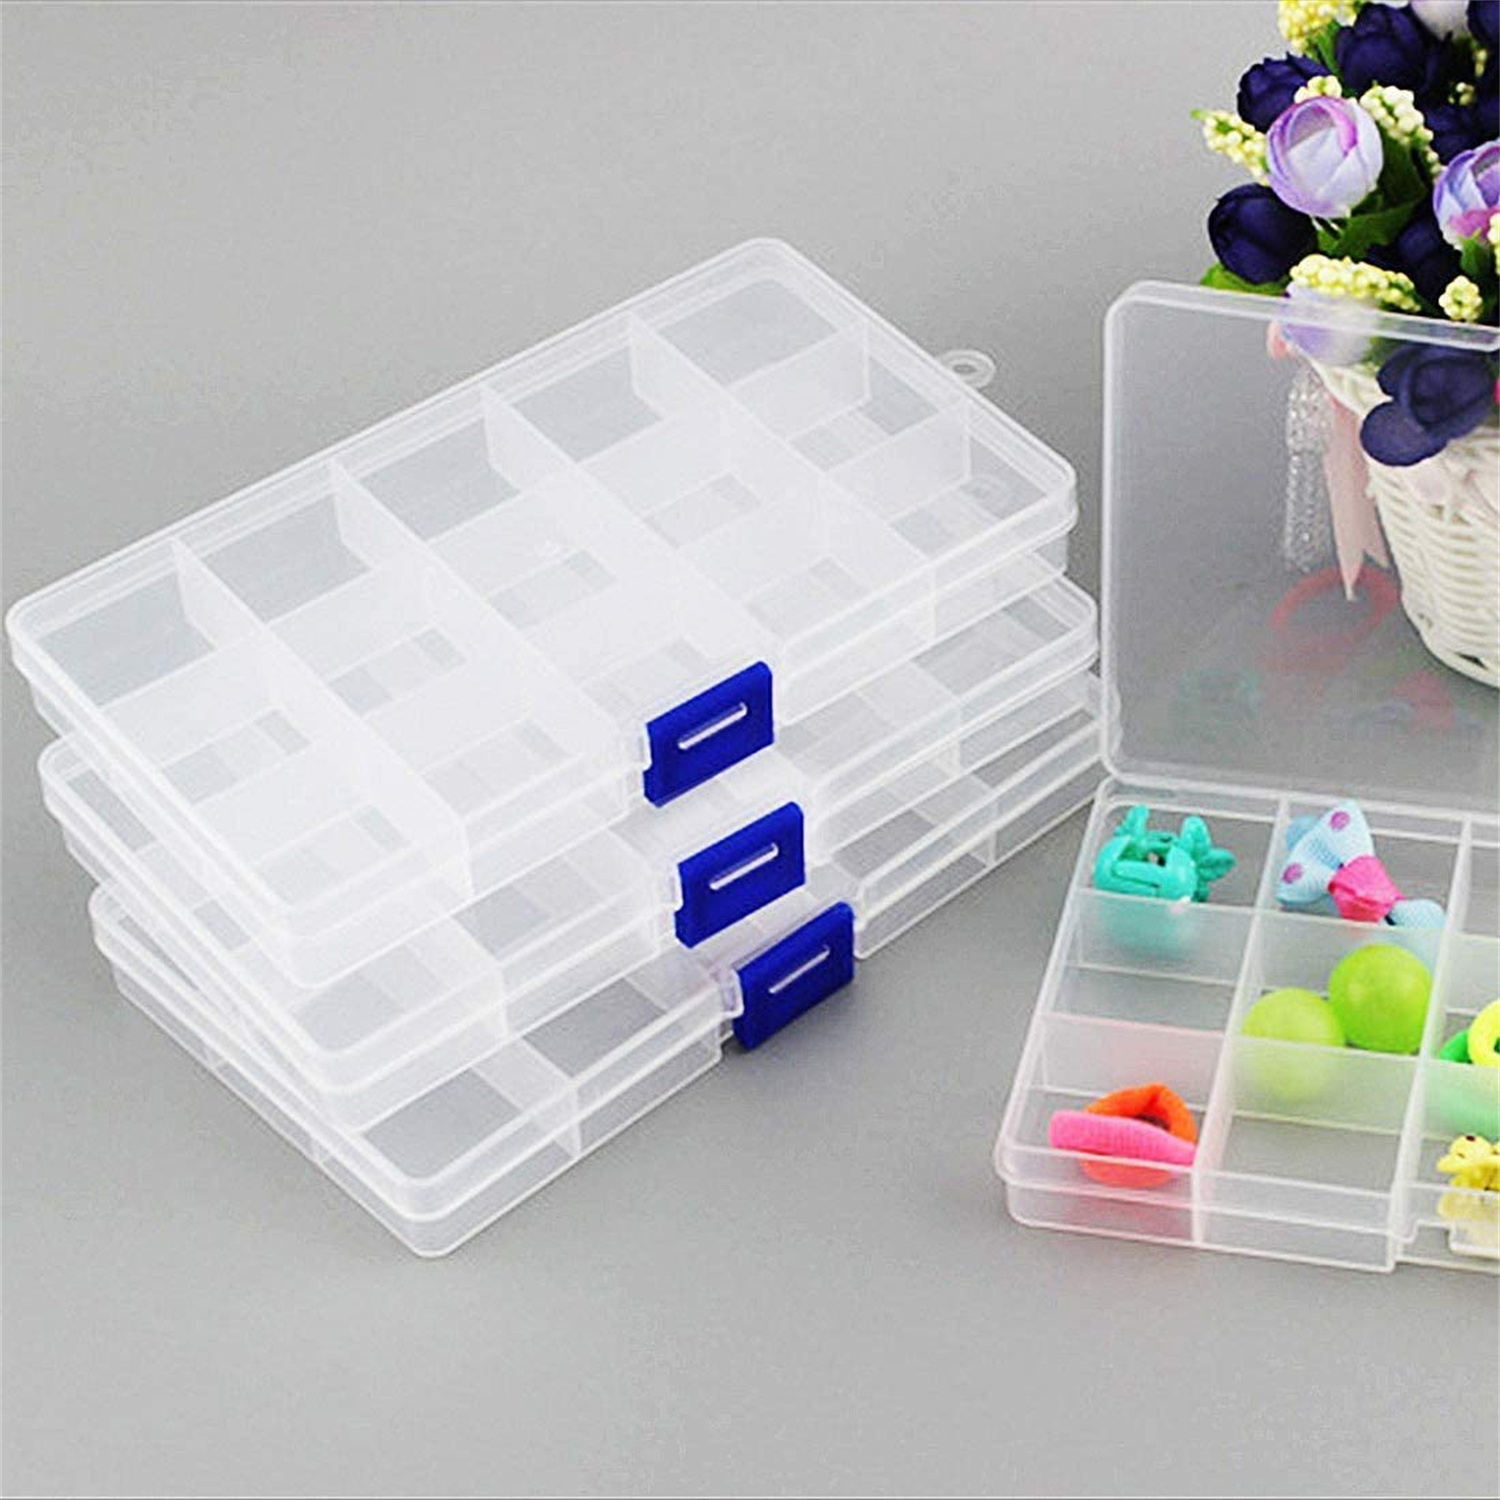 6 Pcs Plastic Jewellery Organizer Box Clear Bead Storage Box with 15 Grids  Adjustable Craft Box Organiser Plastic Storage Case for Beads, Earring,  Screws and Small Craft Items 